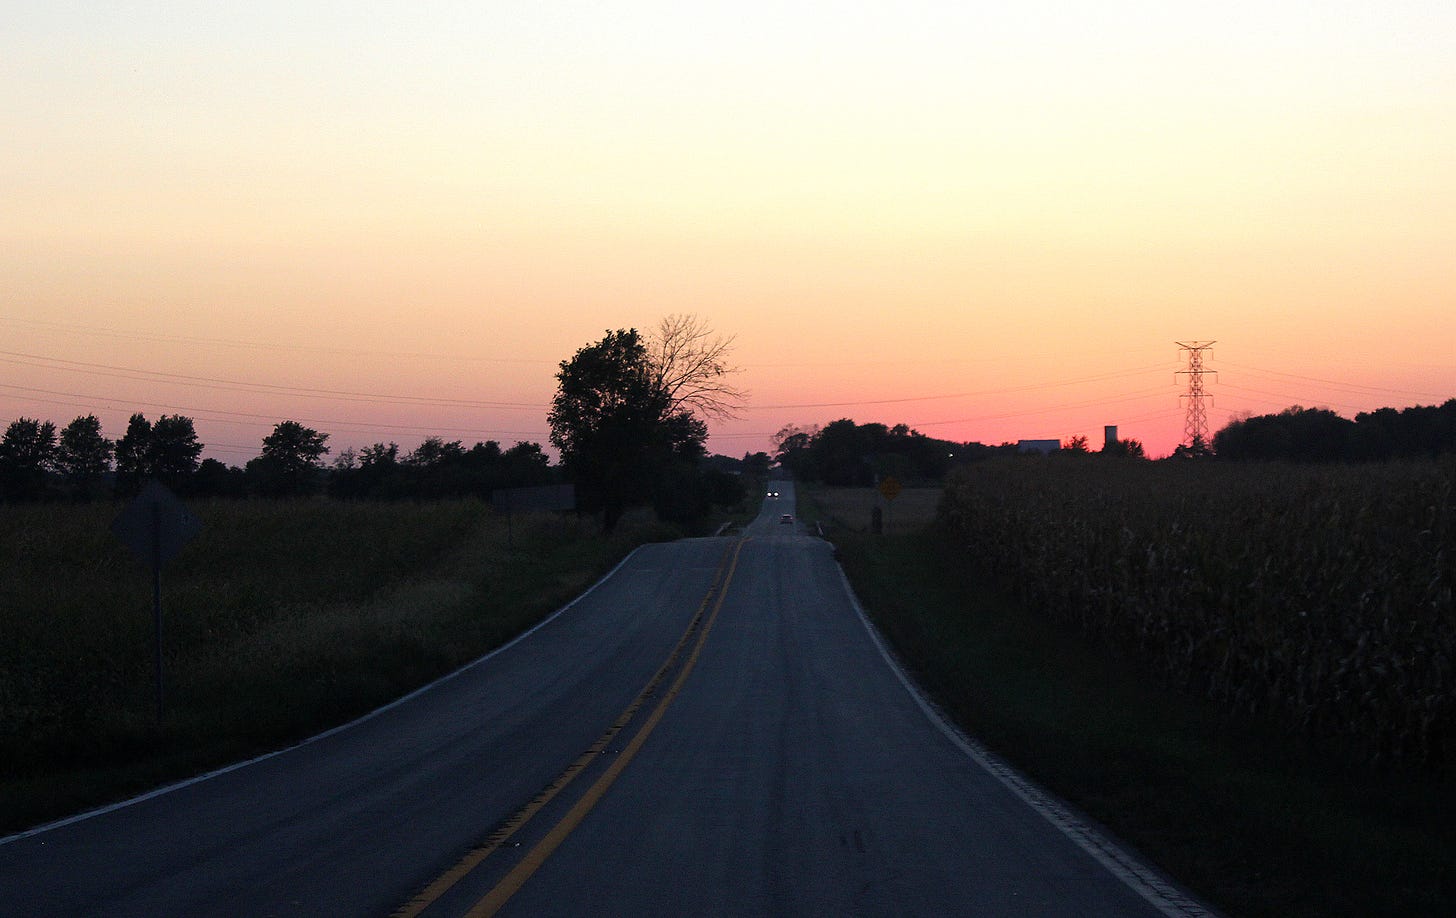 Corn on the right, beans on the left. Roads like this are obligatory travel corridors in this state. Yet, we regard them as things of beauty, particularly on nights with cloudless sunsets.